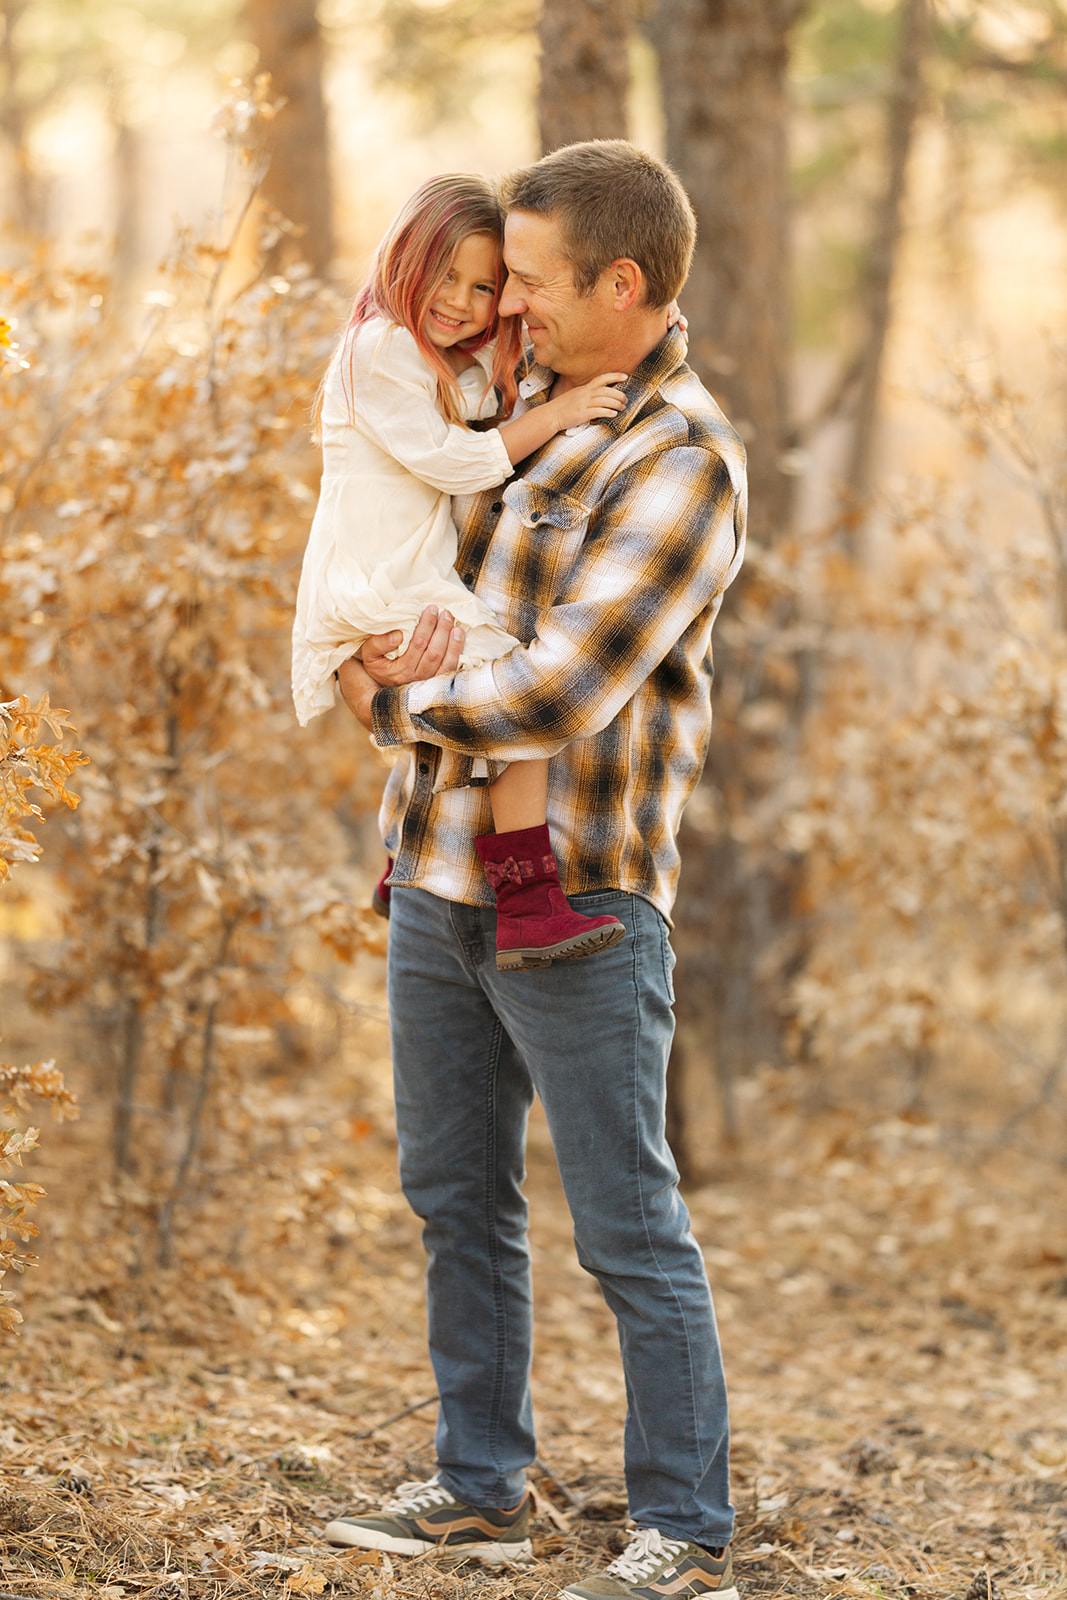 Colorado fall family photos, November in forest location with mountain background, neutral and natural outfit colors